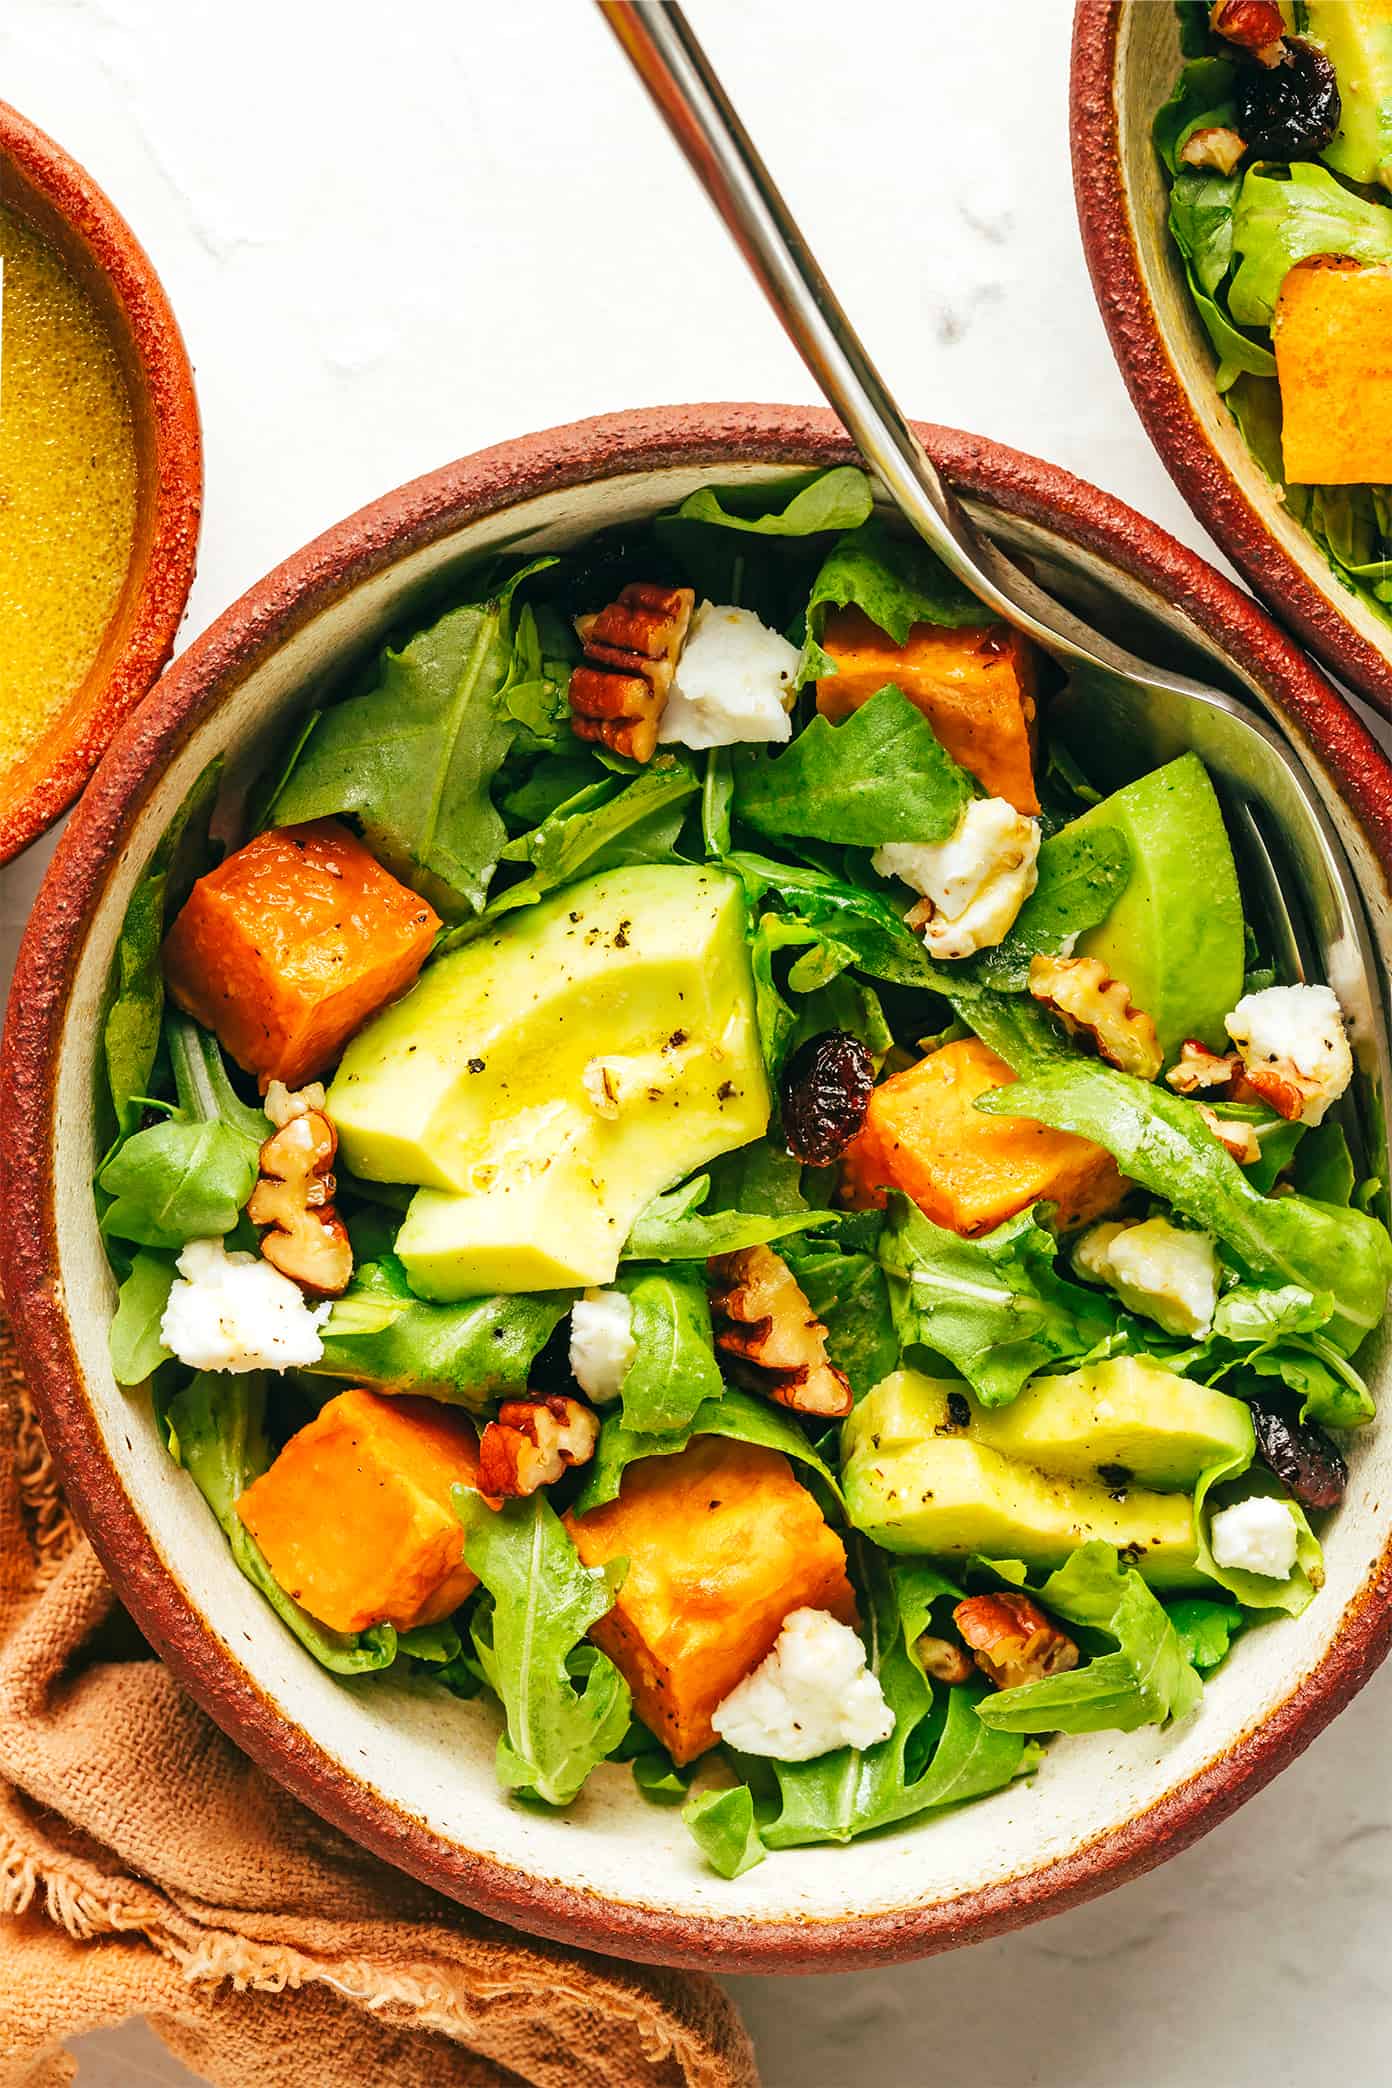 Favorite Fall Salad Recipe | Gimme Some Oven